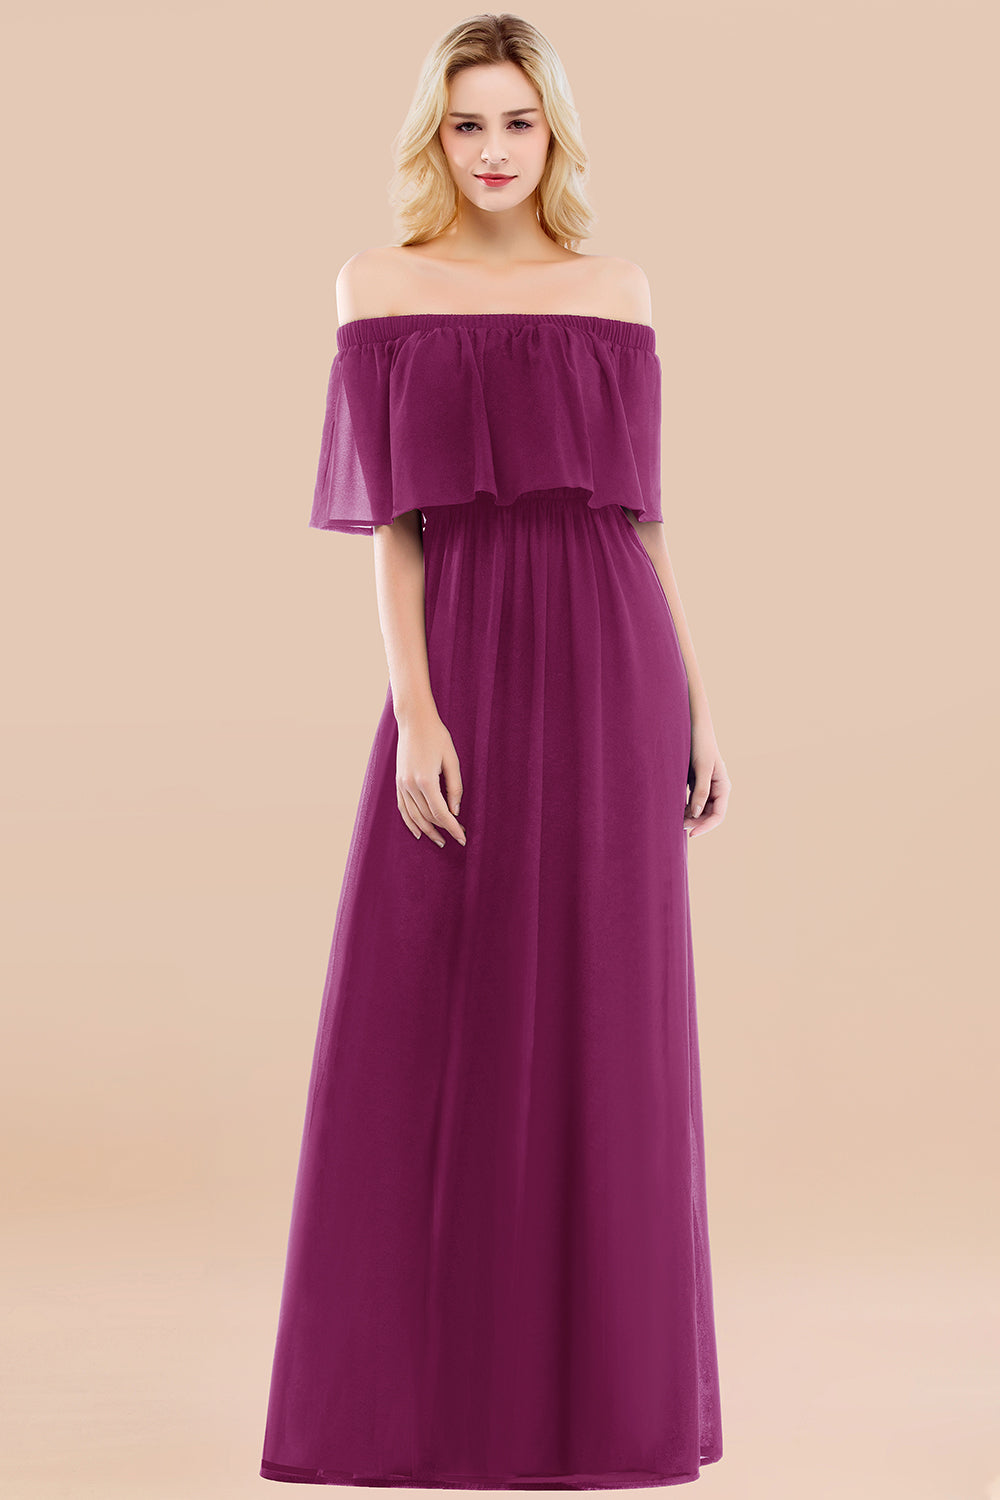 Vintage Off-the-Shoulder Long Burgundy Bridesmaid Dress with Ruffle-27dress